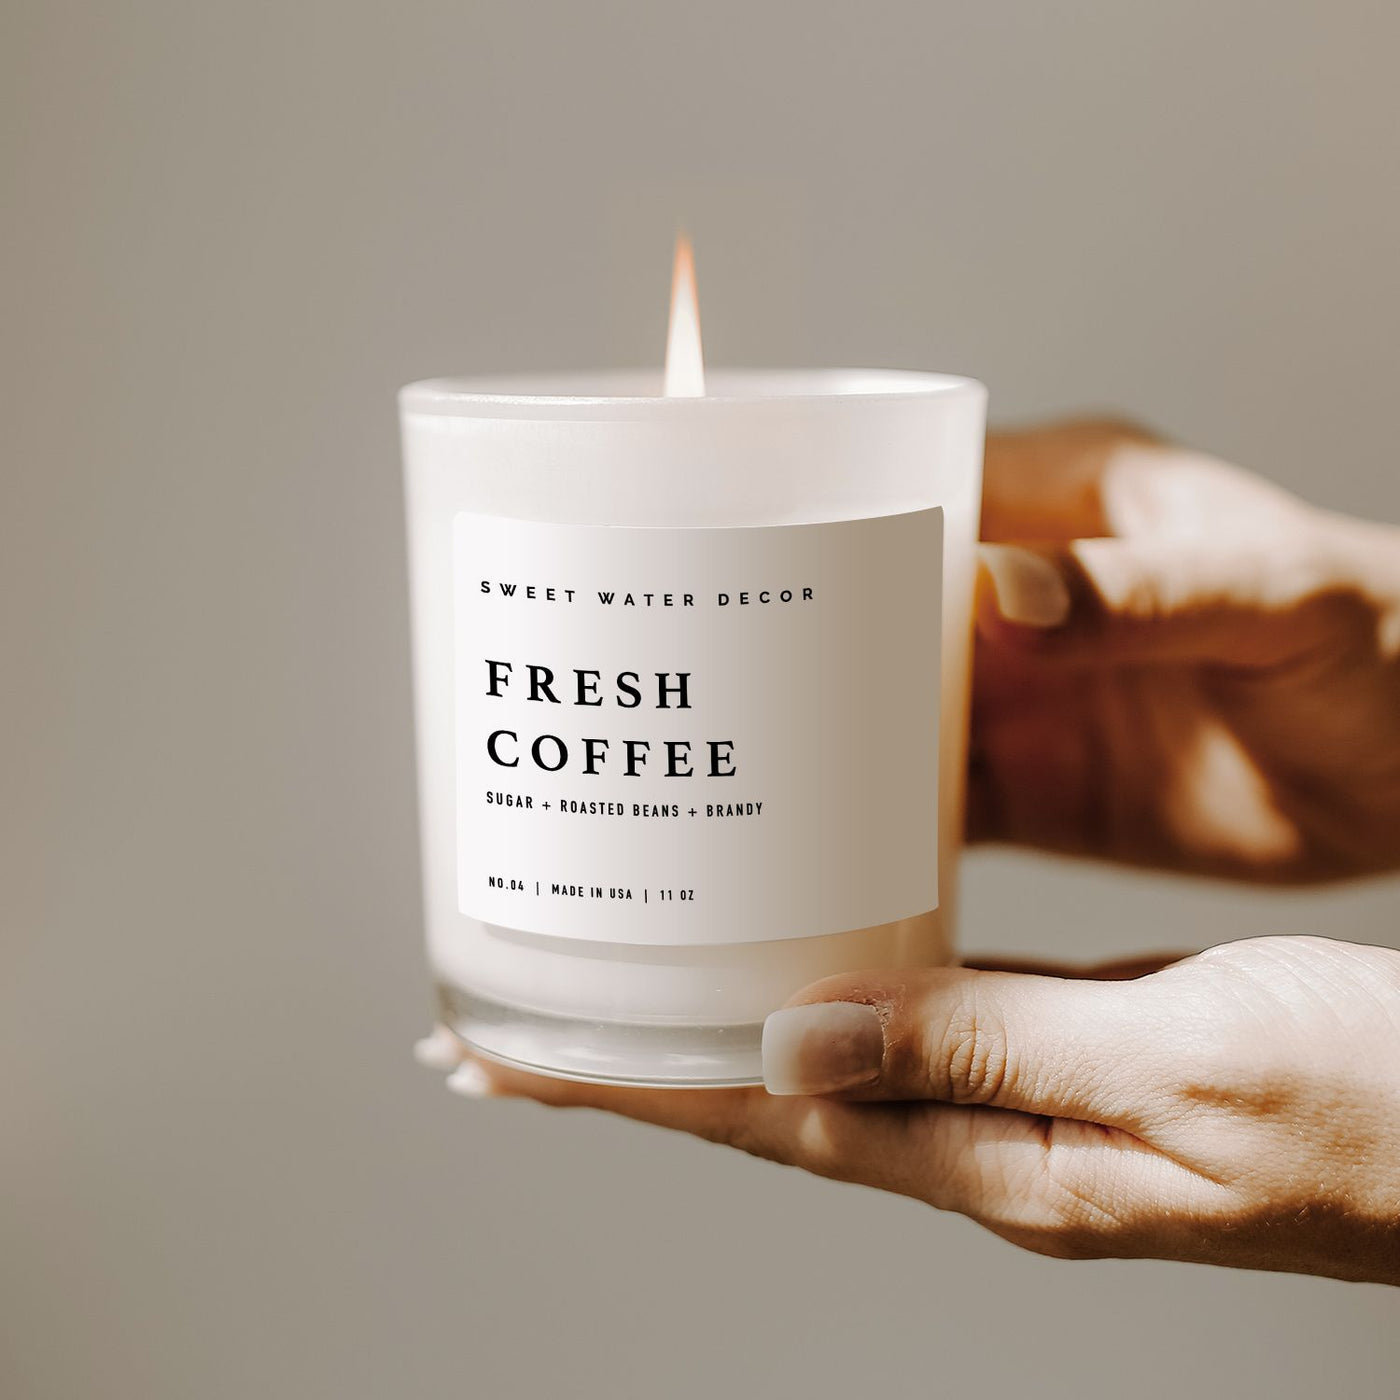 Fresh Coffee Soy Candle - White Jar - 11 oz - Sweet Water Decor - Candles